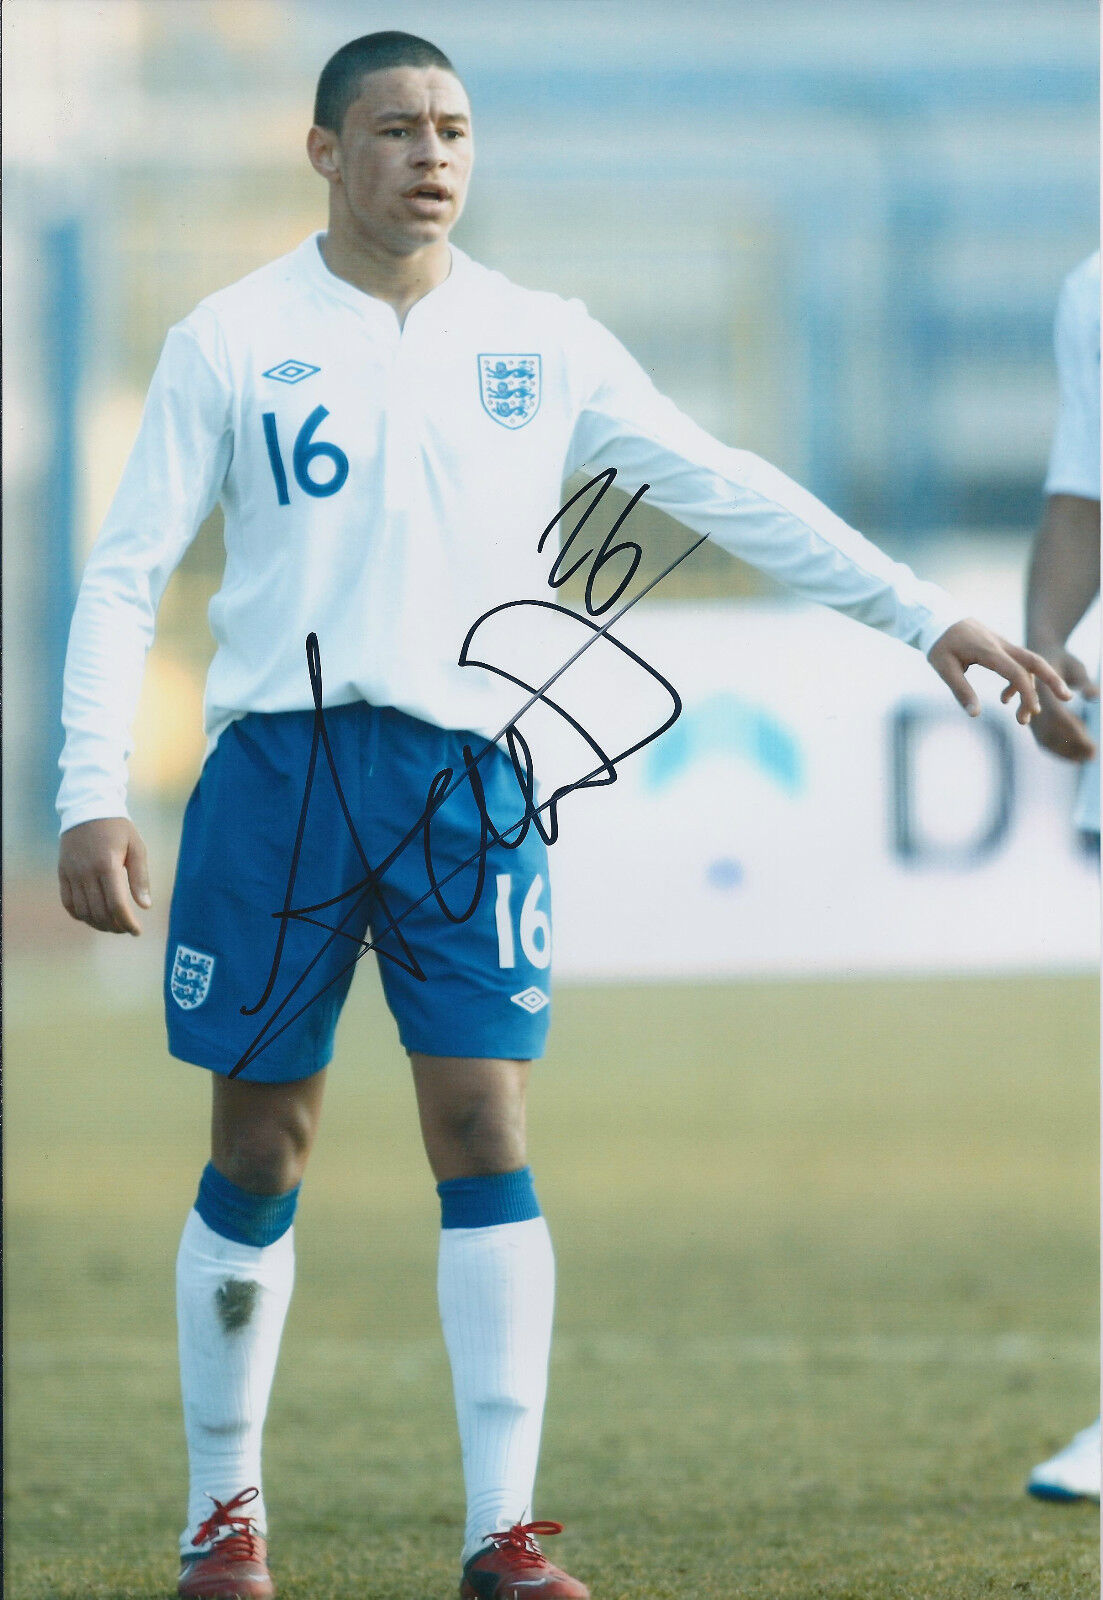 Alex OXLADE-CHAMBERLAIN Signed Autograph 12x8 Photo Poster painting AFTAL COA Arsenal